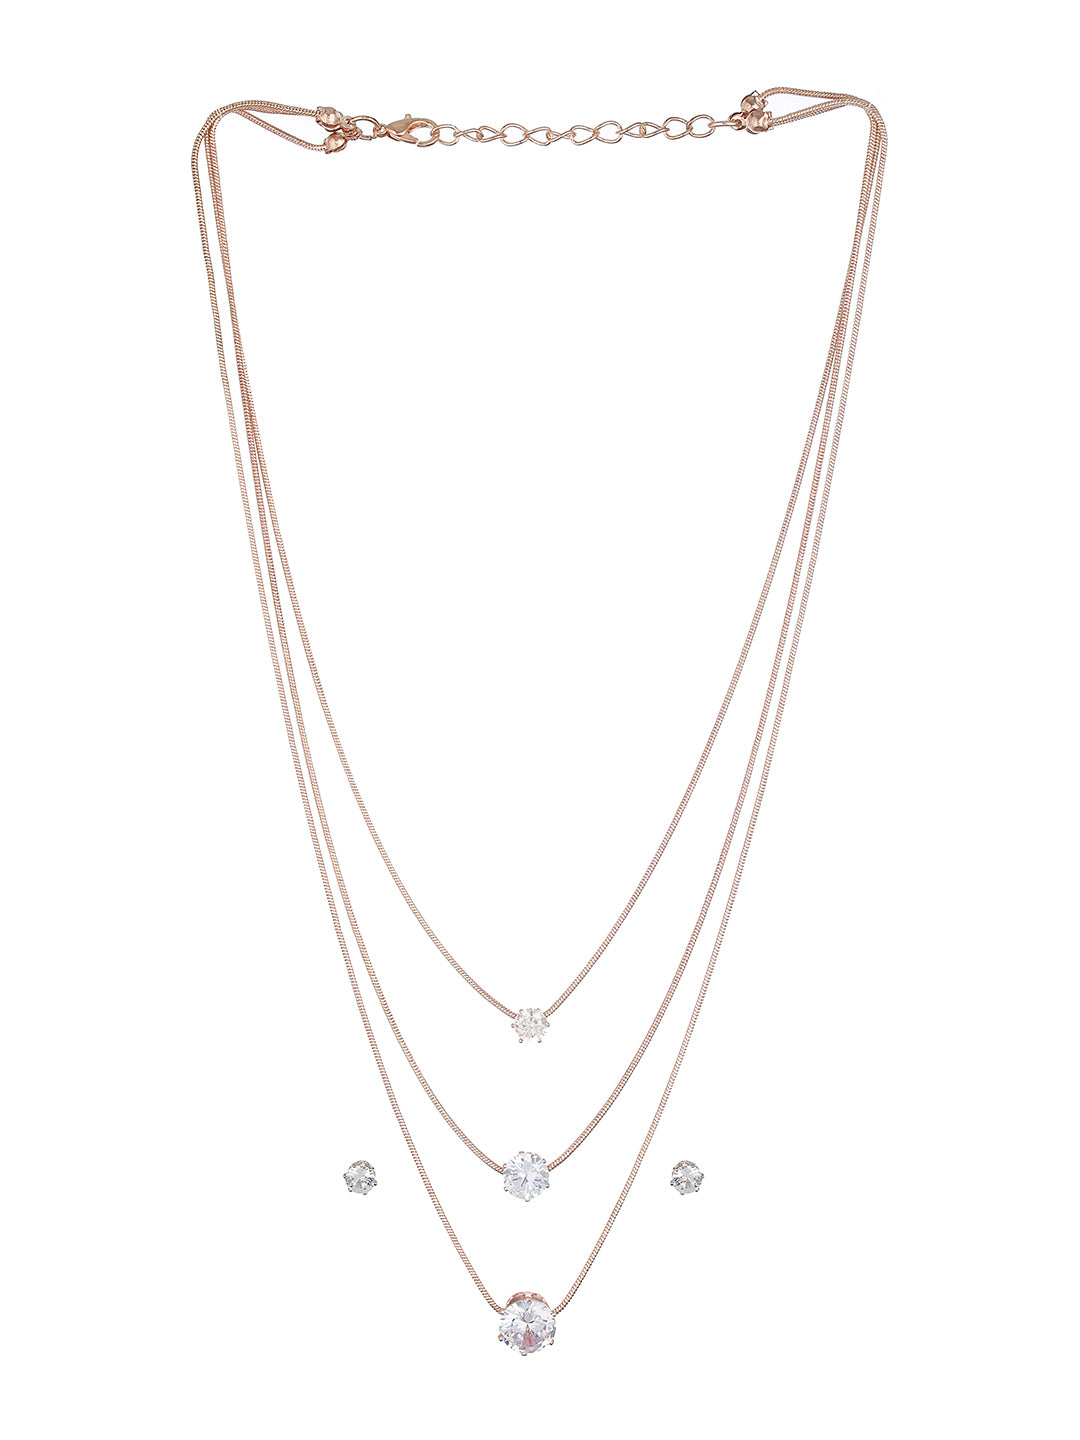 Prita by Priyaasi Triple Layer Solitaire Rose Gold-Plated Jewellery Set